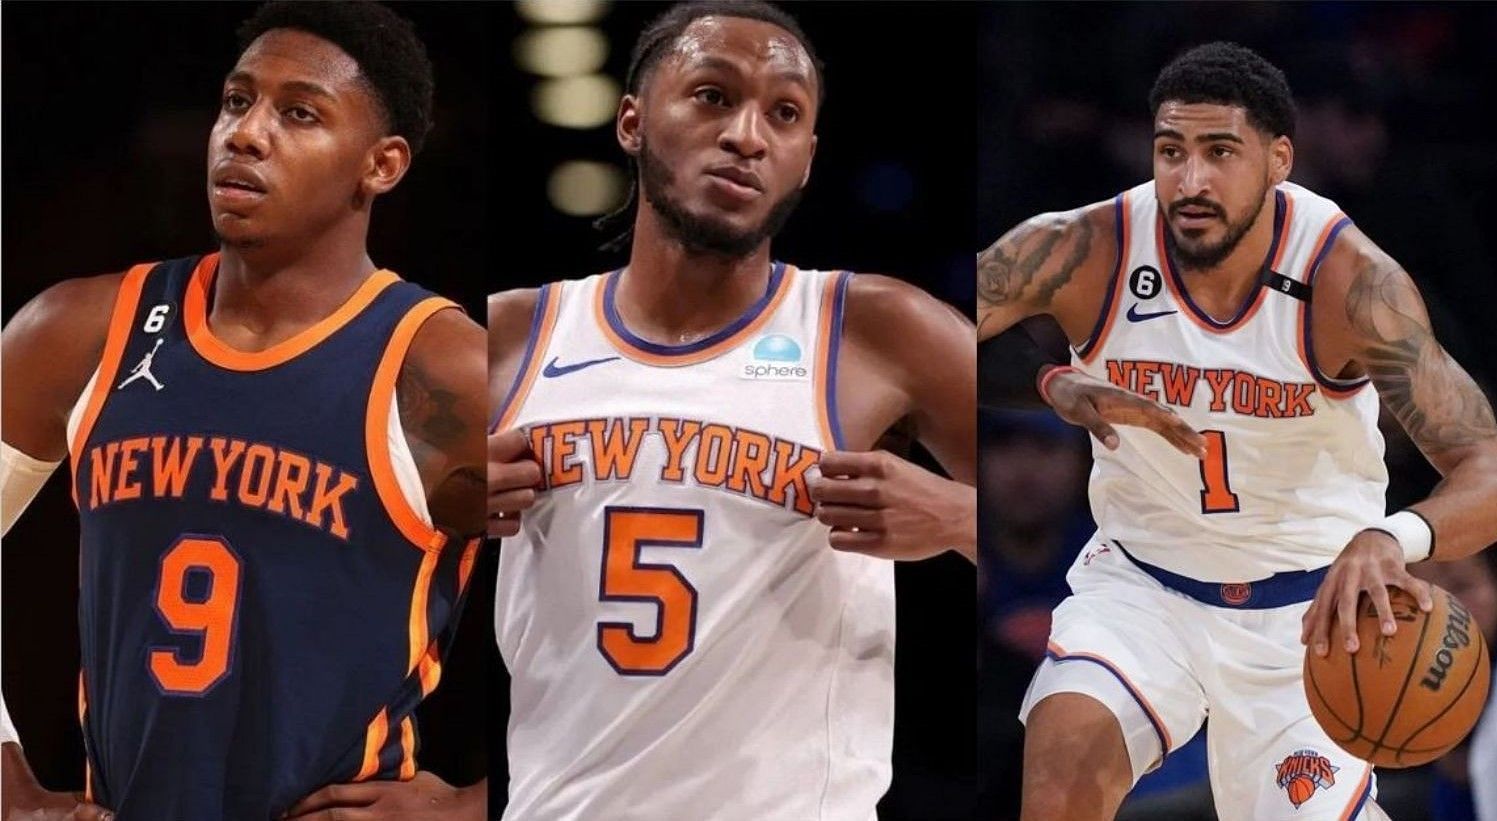 A team source was quoted as saying that the New York Knicks are better after trading away (from left) RJ Barrett, Immanuel Quickley and Obi Toppin.